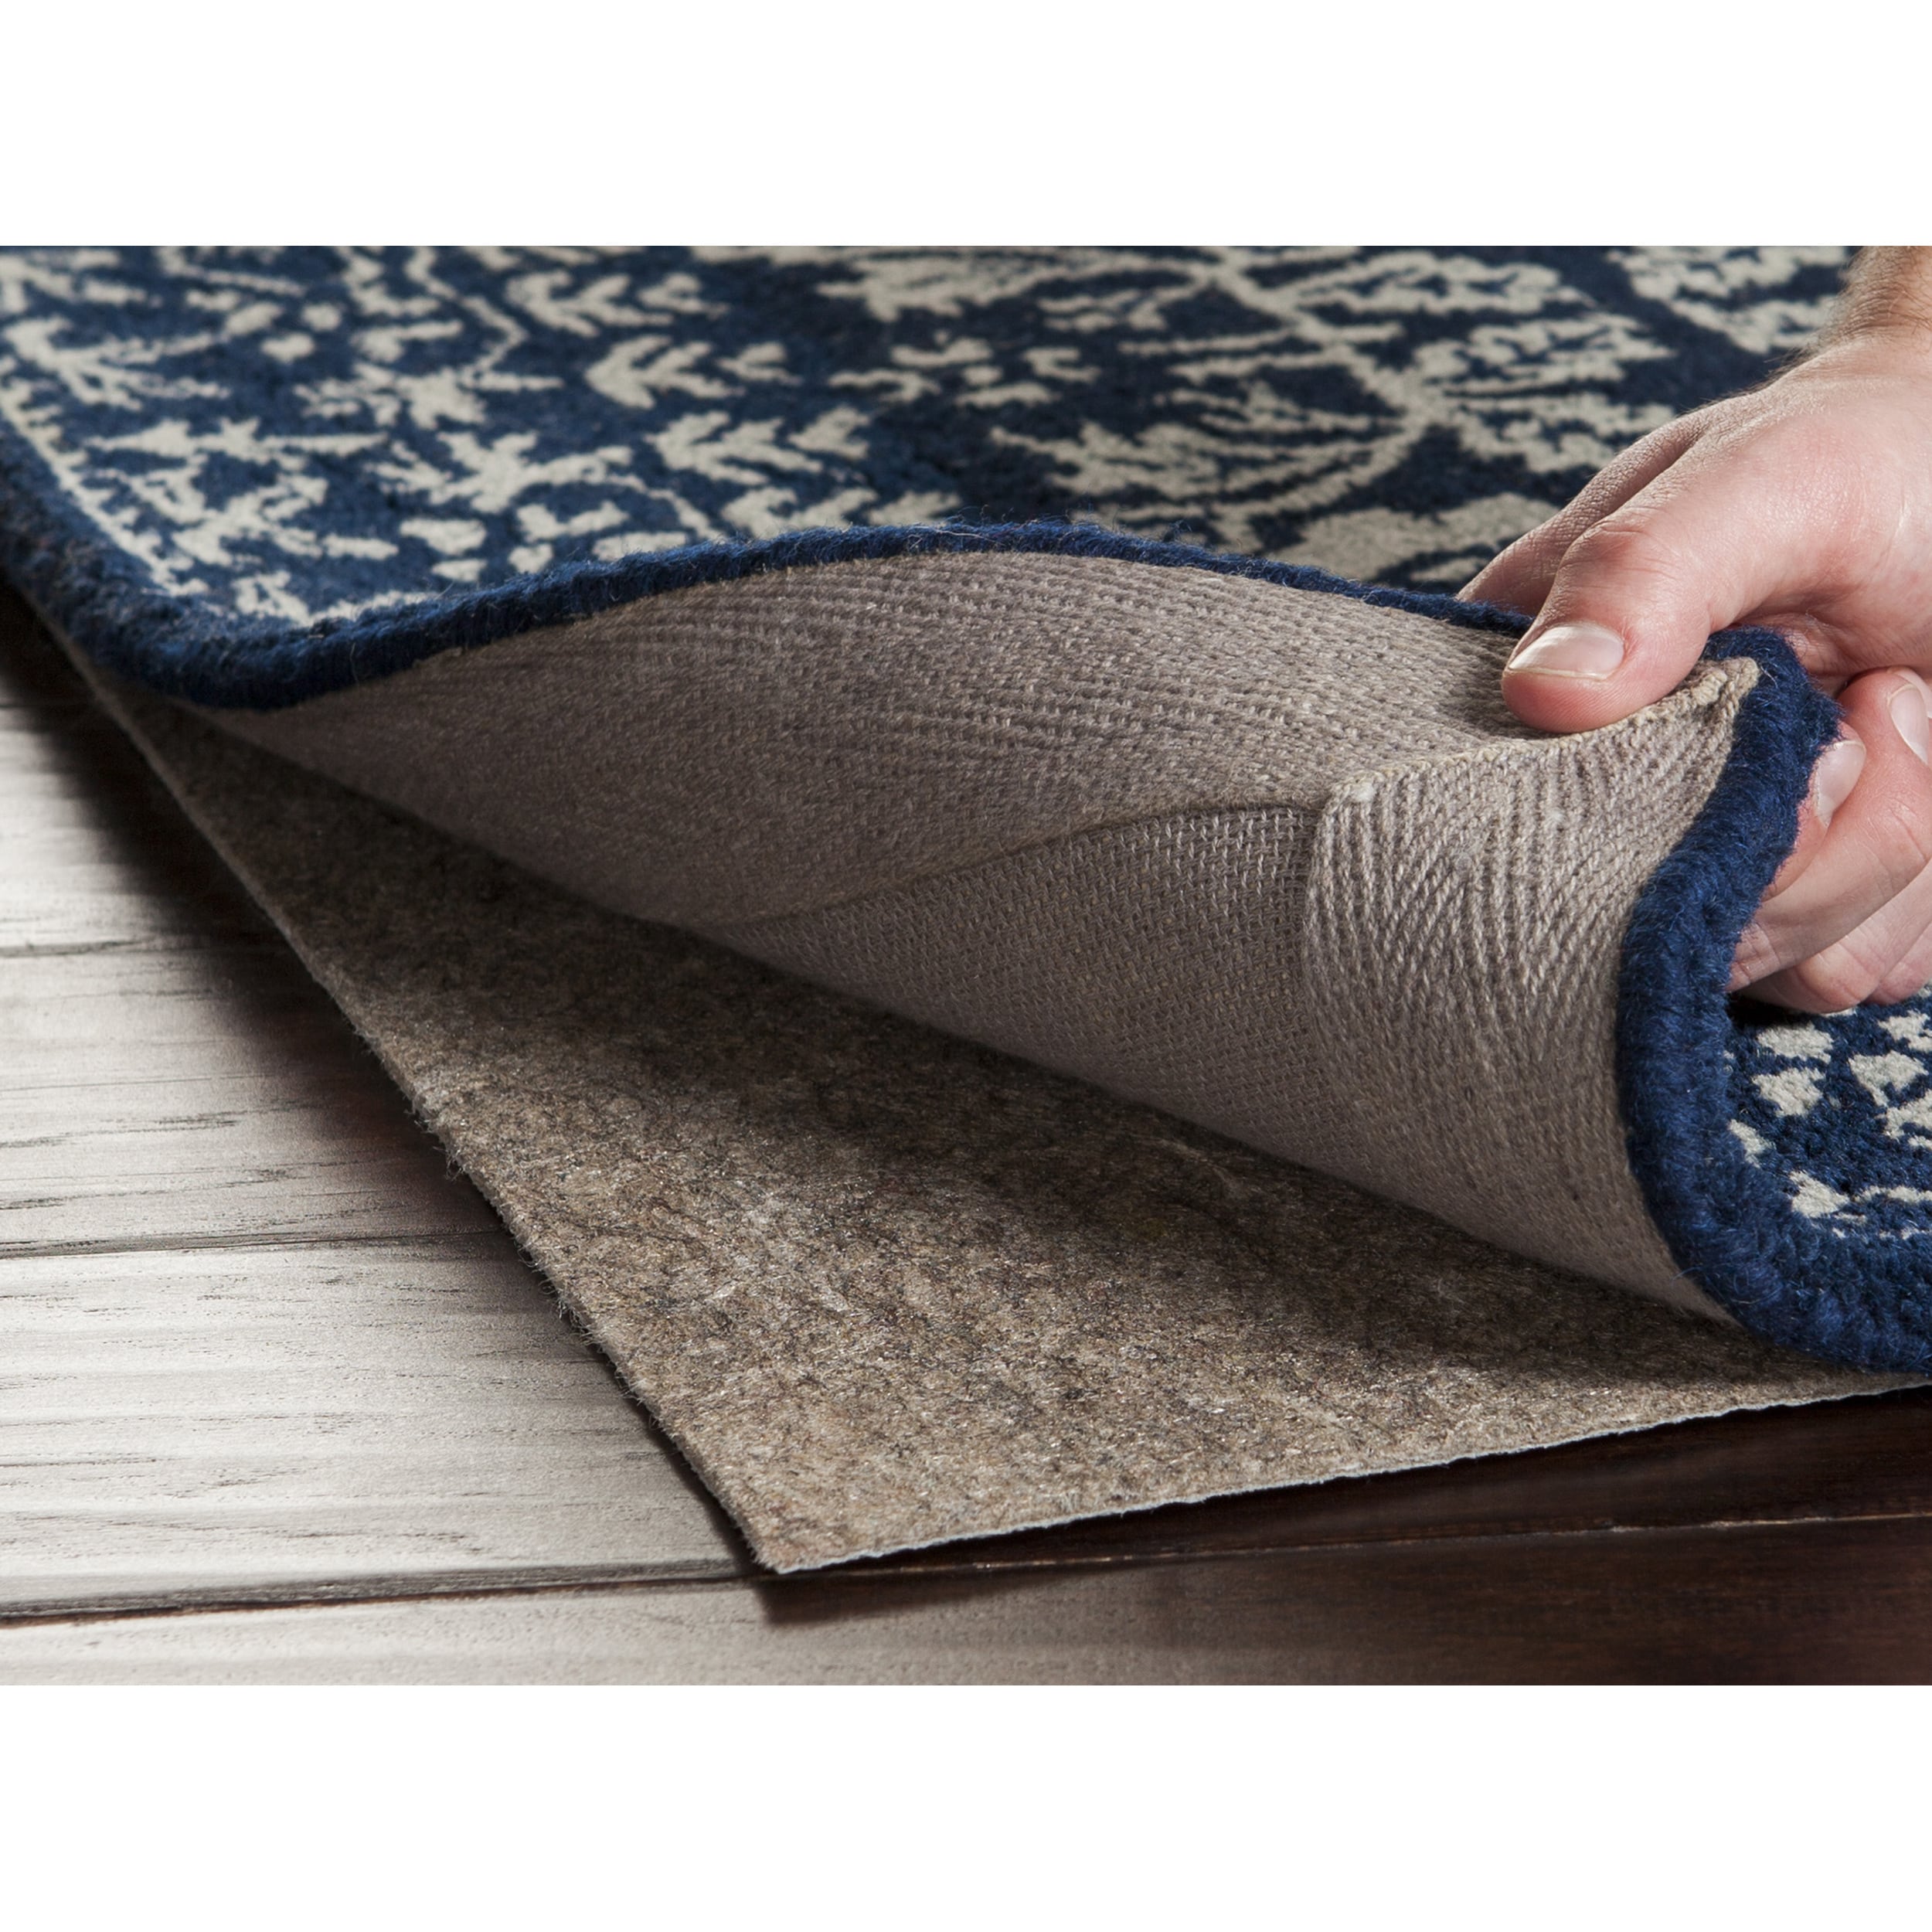 RUGPADUSA - Dual Surface - 10'x14' - 1/8 Thick - Felt + Rubber - Non-Slip  Backing Rug Pad - Adds Low-Profile Comfort and Protection 